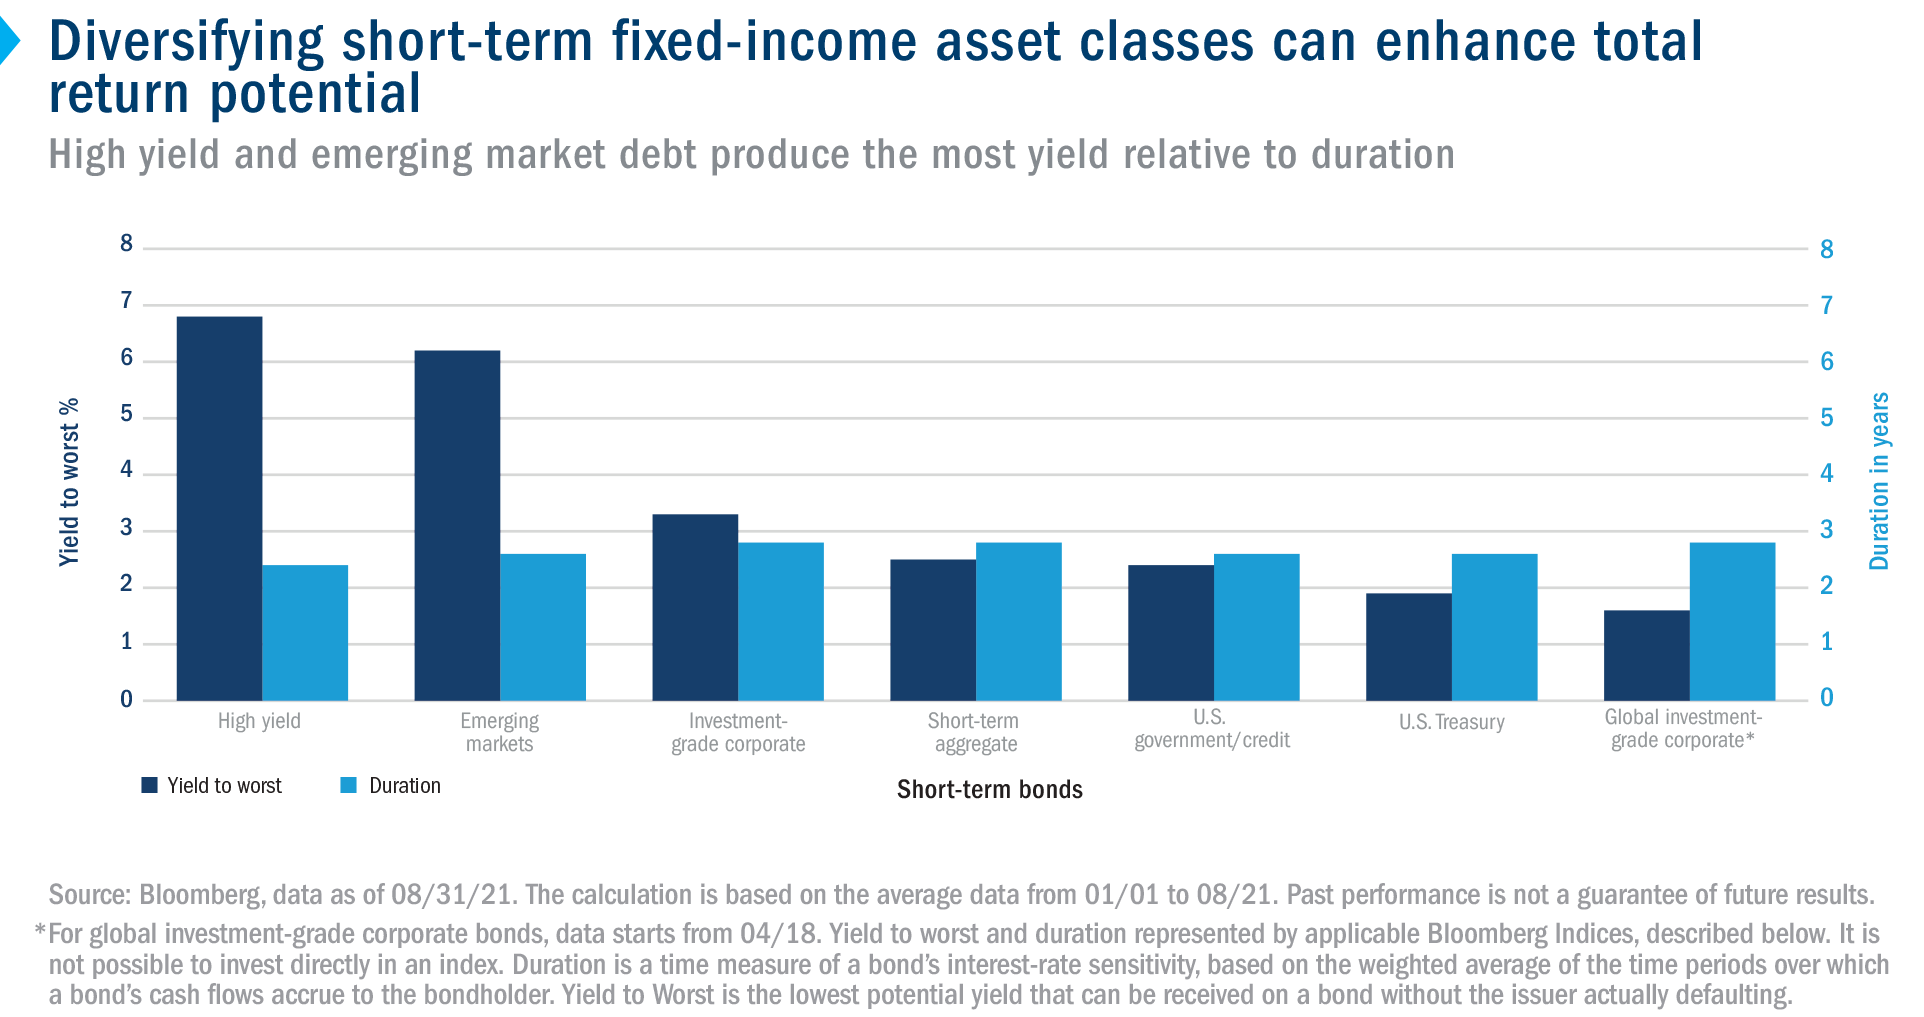 Bar chart showing yield to worst and duration for various short-term fixed-income asset classes, with high yield and emerging markets debt producing the most yield relative to duration.